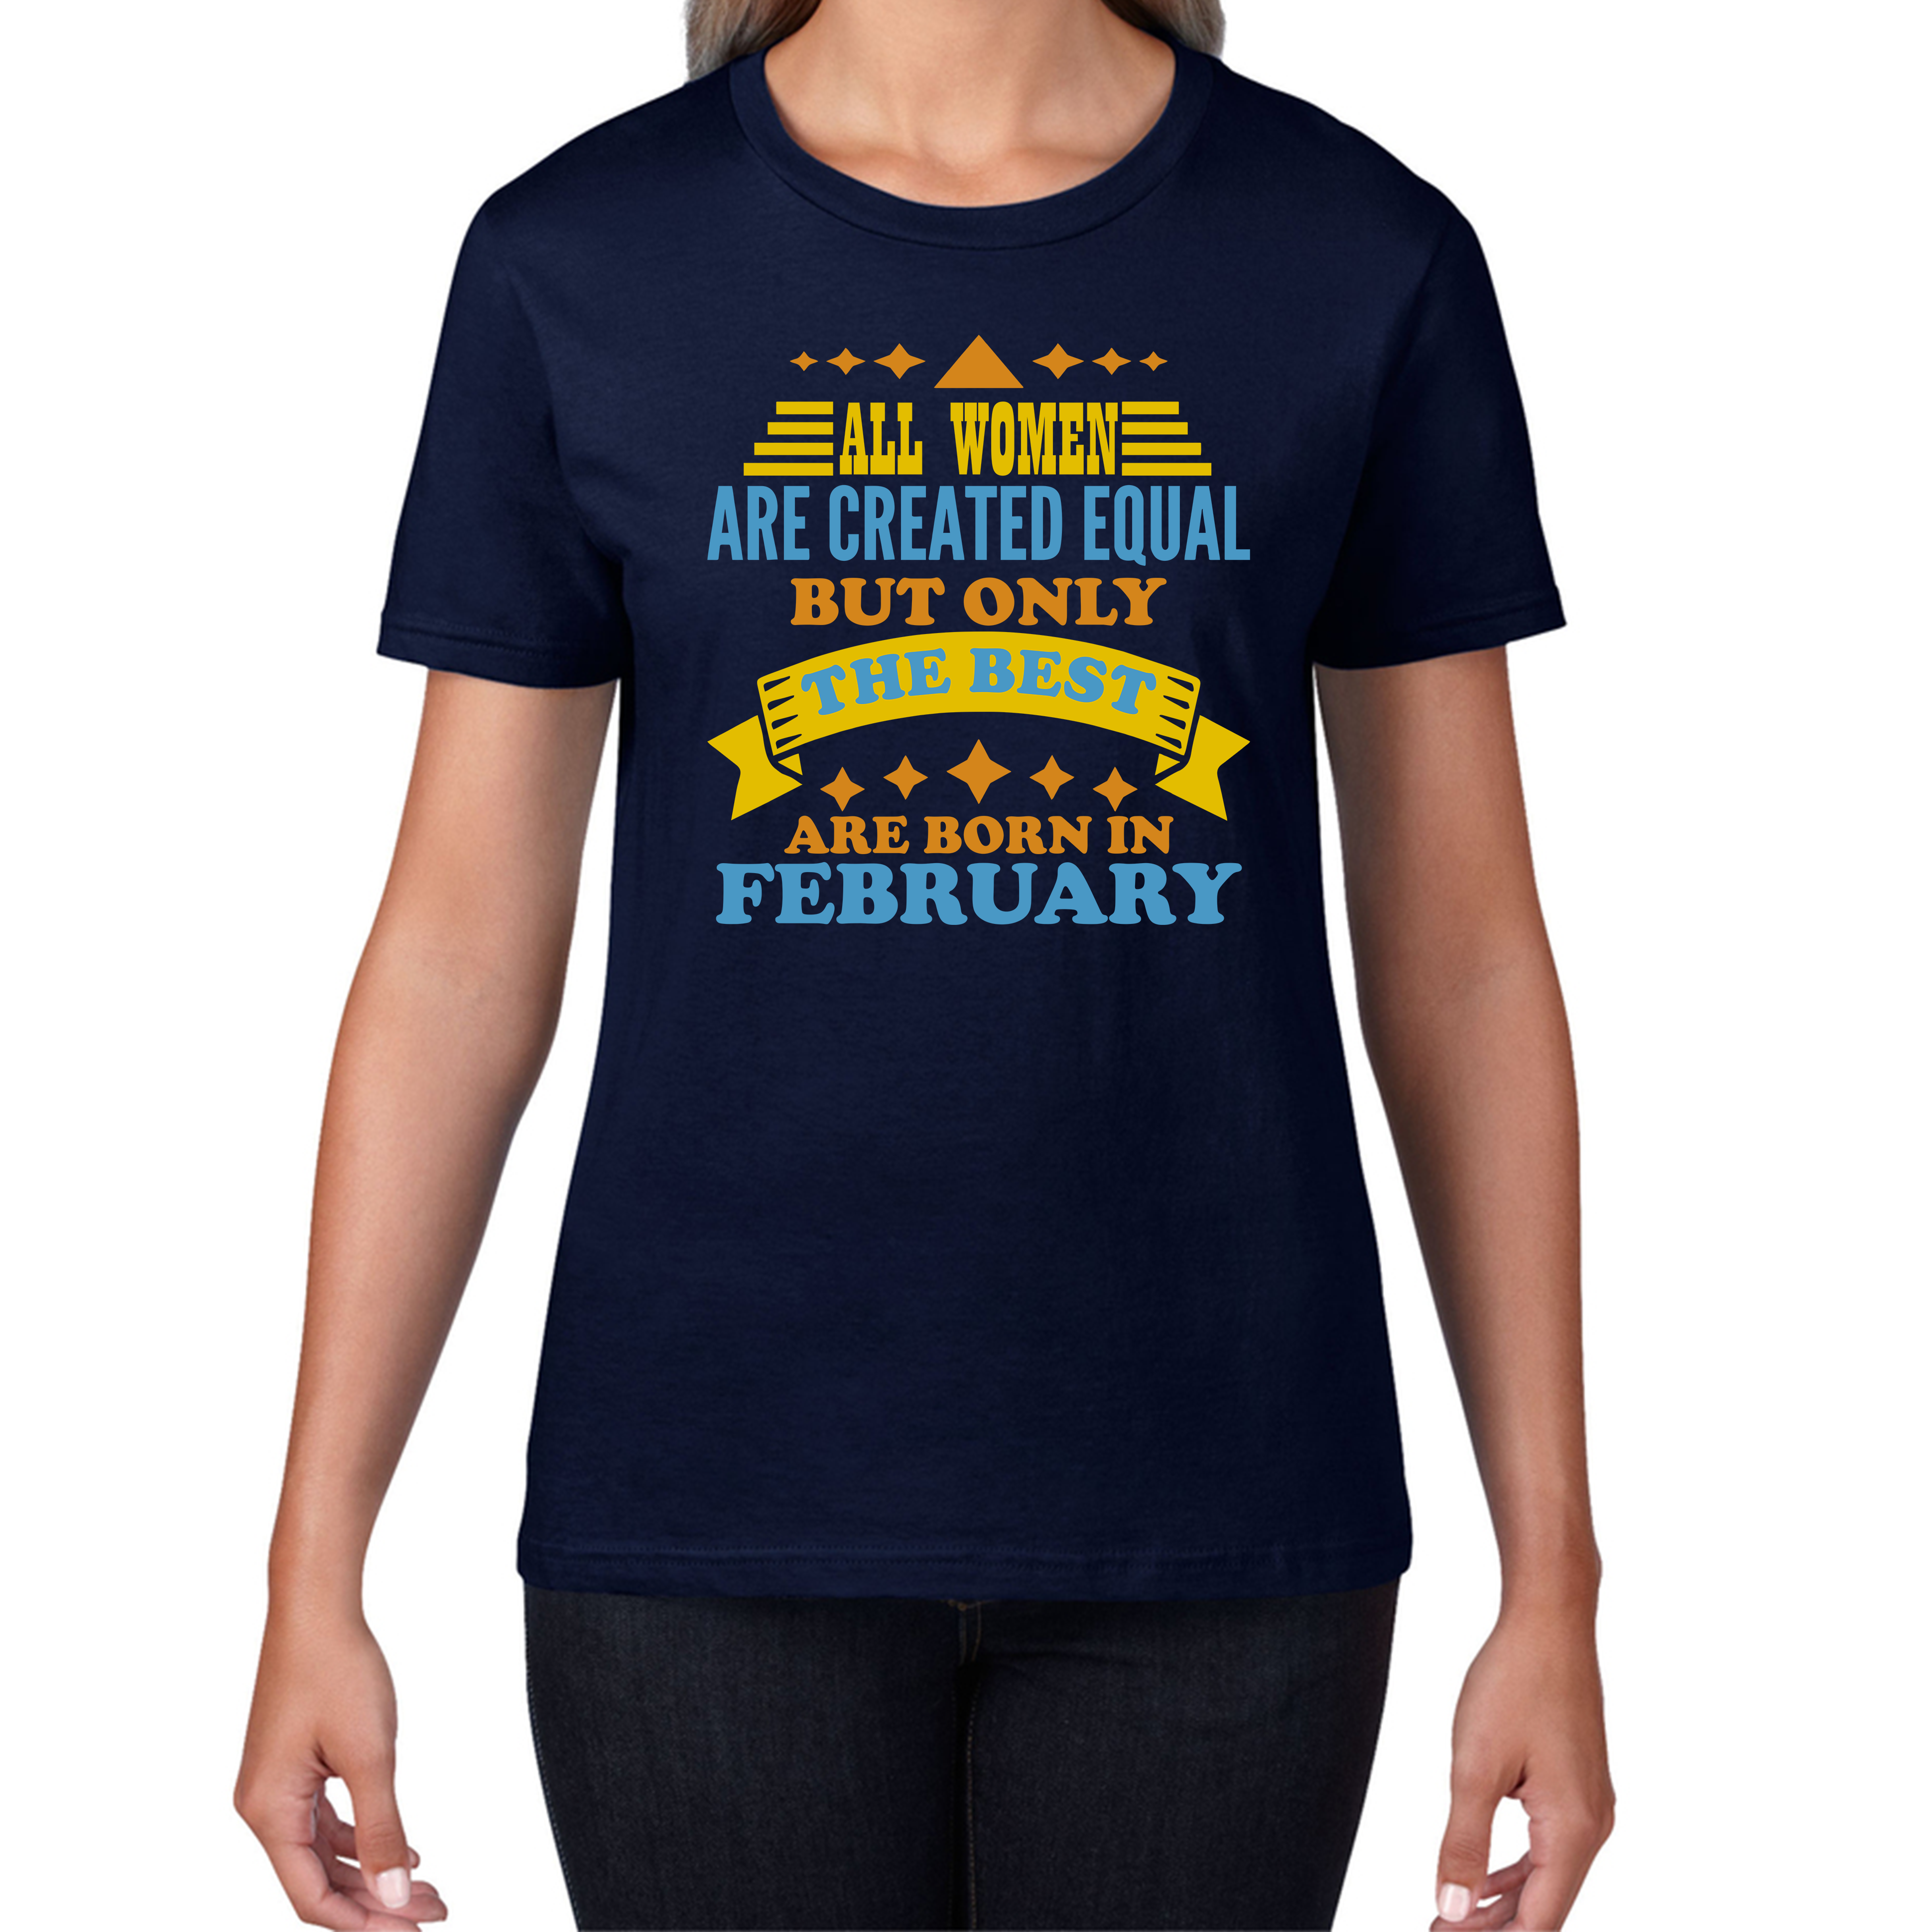 All Women Are Created Equal But Only The Best Are Born In February Funny Birthday Quote Womens Tee Top